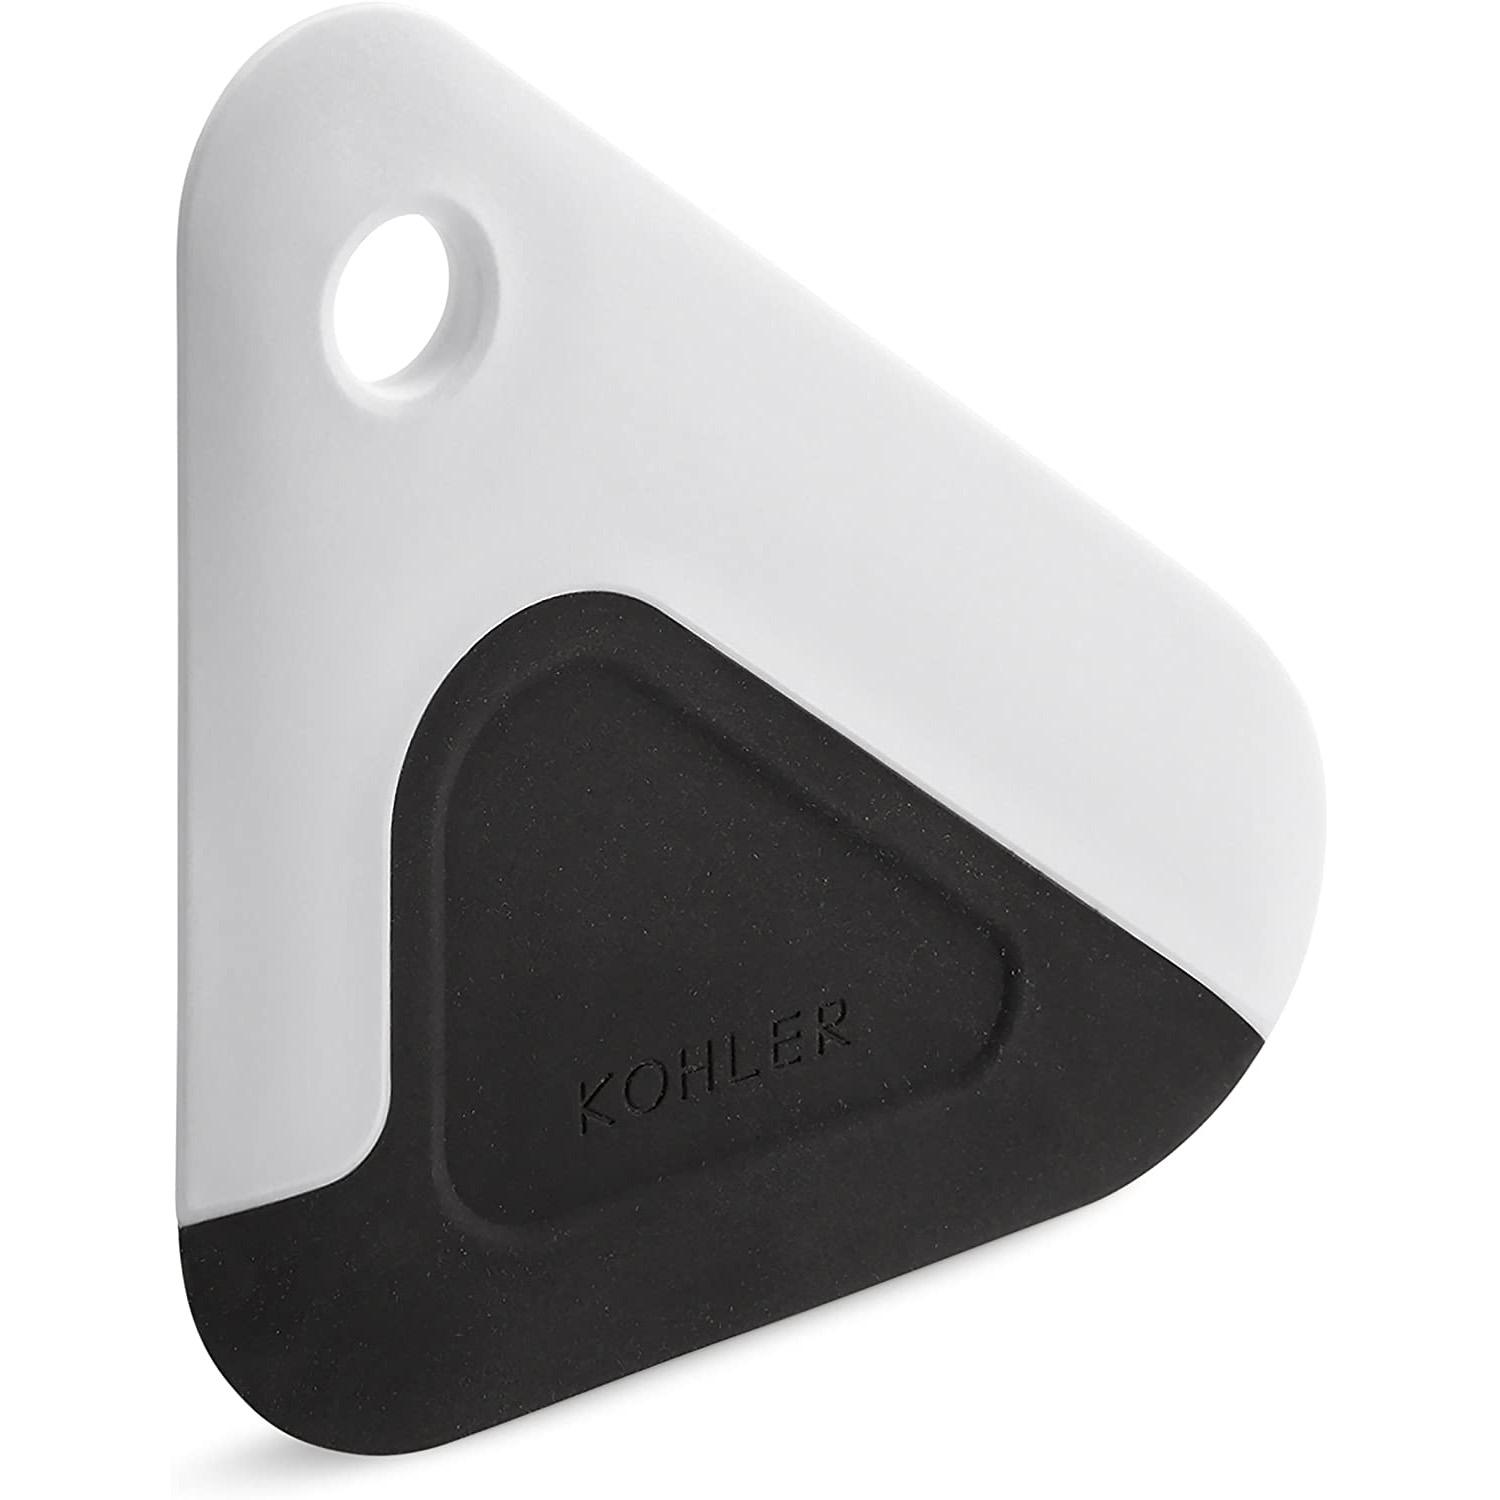 Kohler Kitchen Pot and Pan Silicone Dish Scraper for $3.98